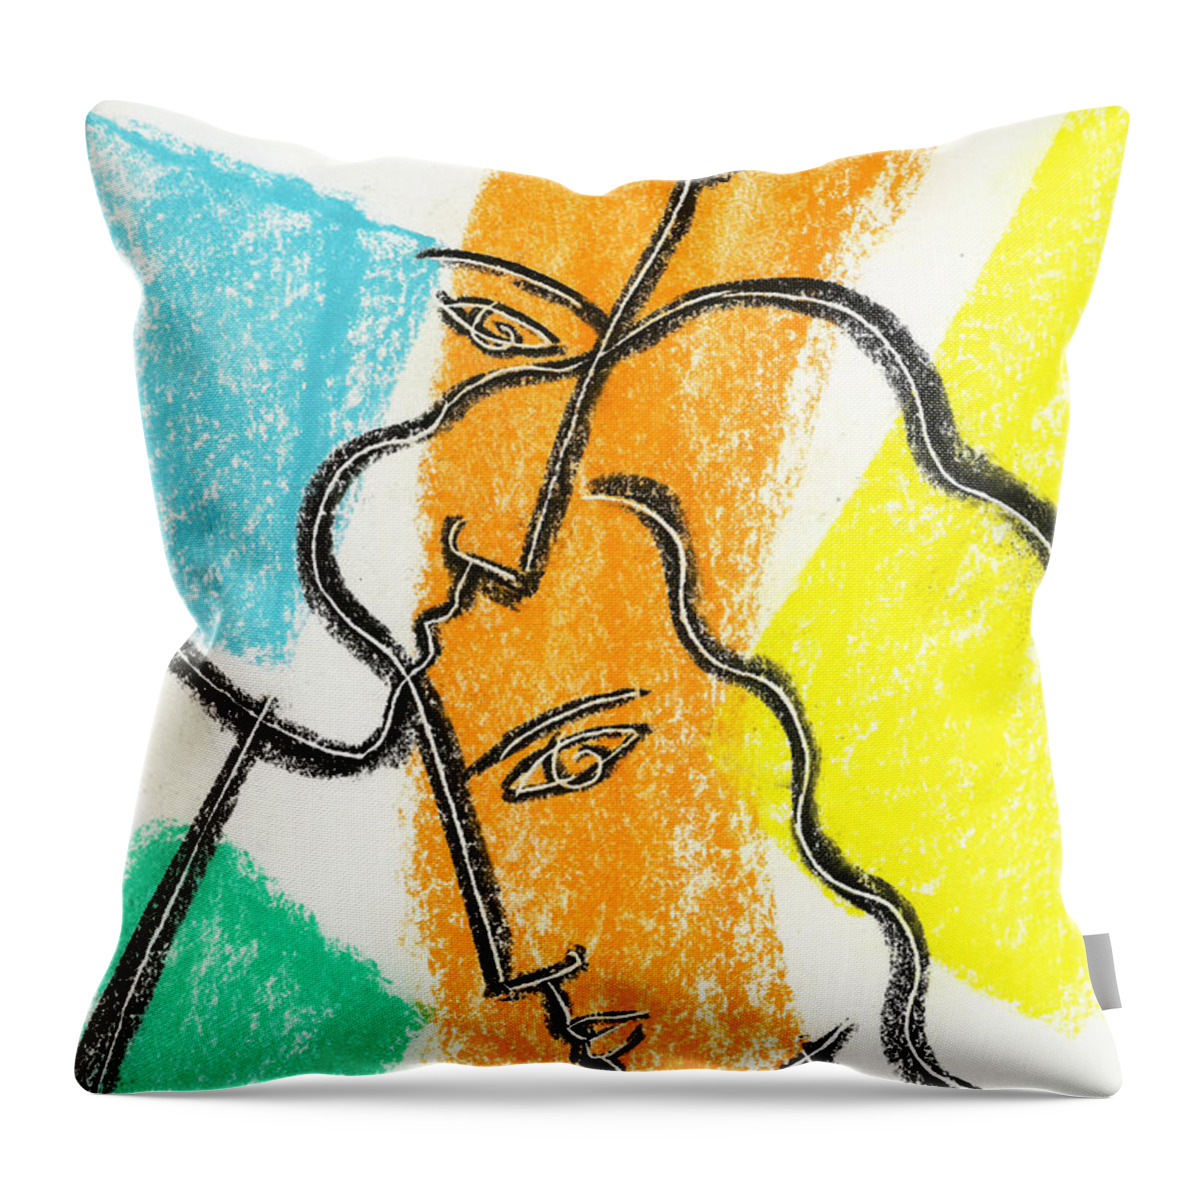  Balance Bonding Boyfriend Color Color Image Colour Connecting Connection Couple Drawing Face Female Friend Friendship Girlfriend Head Husband Illustration Illustration And Painting Jointly Lineart Male Man Men And Women People Person Profile Side View Spouse Supportive Sweetheart Together Unification Unifying Vertical Wife Woman Throw Pillow featuring the painting Together #2 by Leon Zernitsky